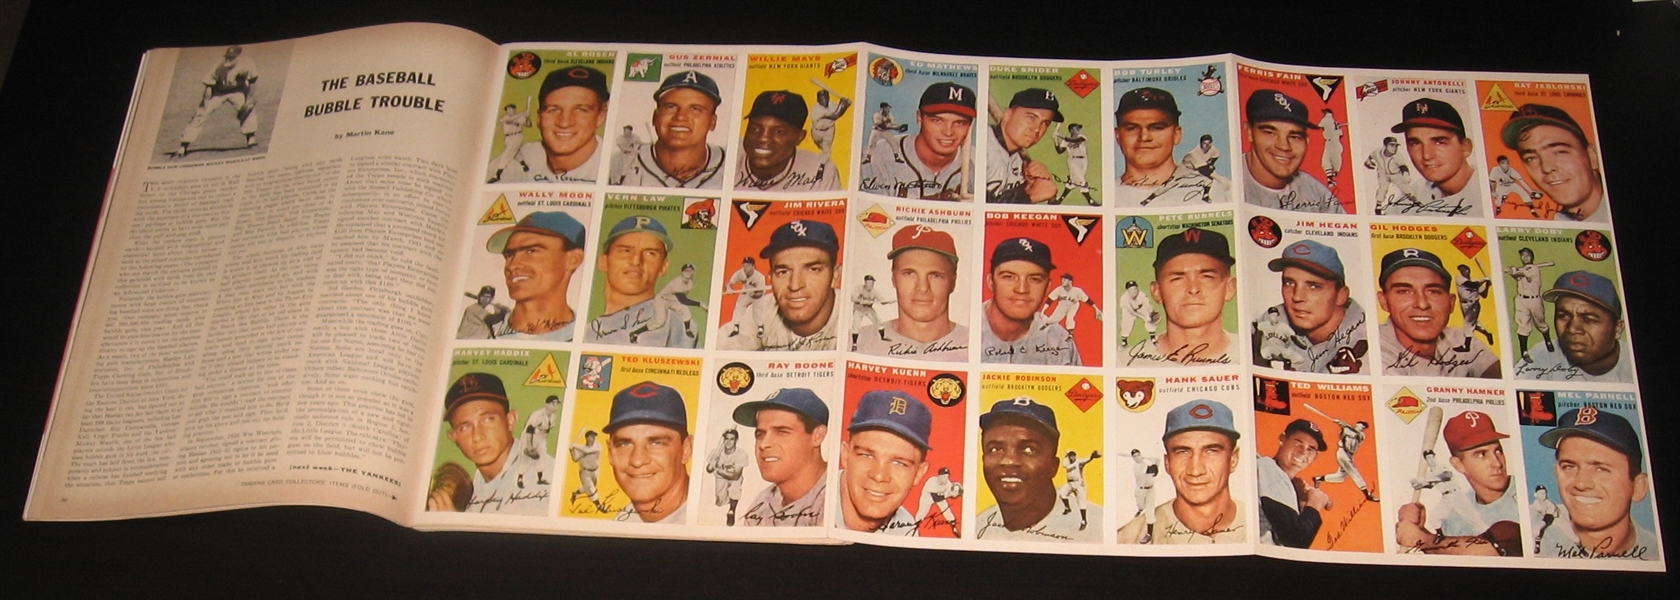 1954 Sports Illustrated (1-4) W/ Cards